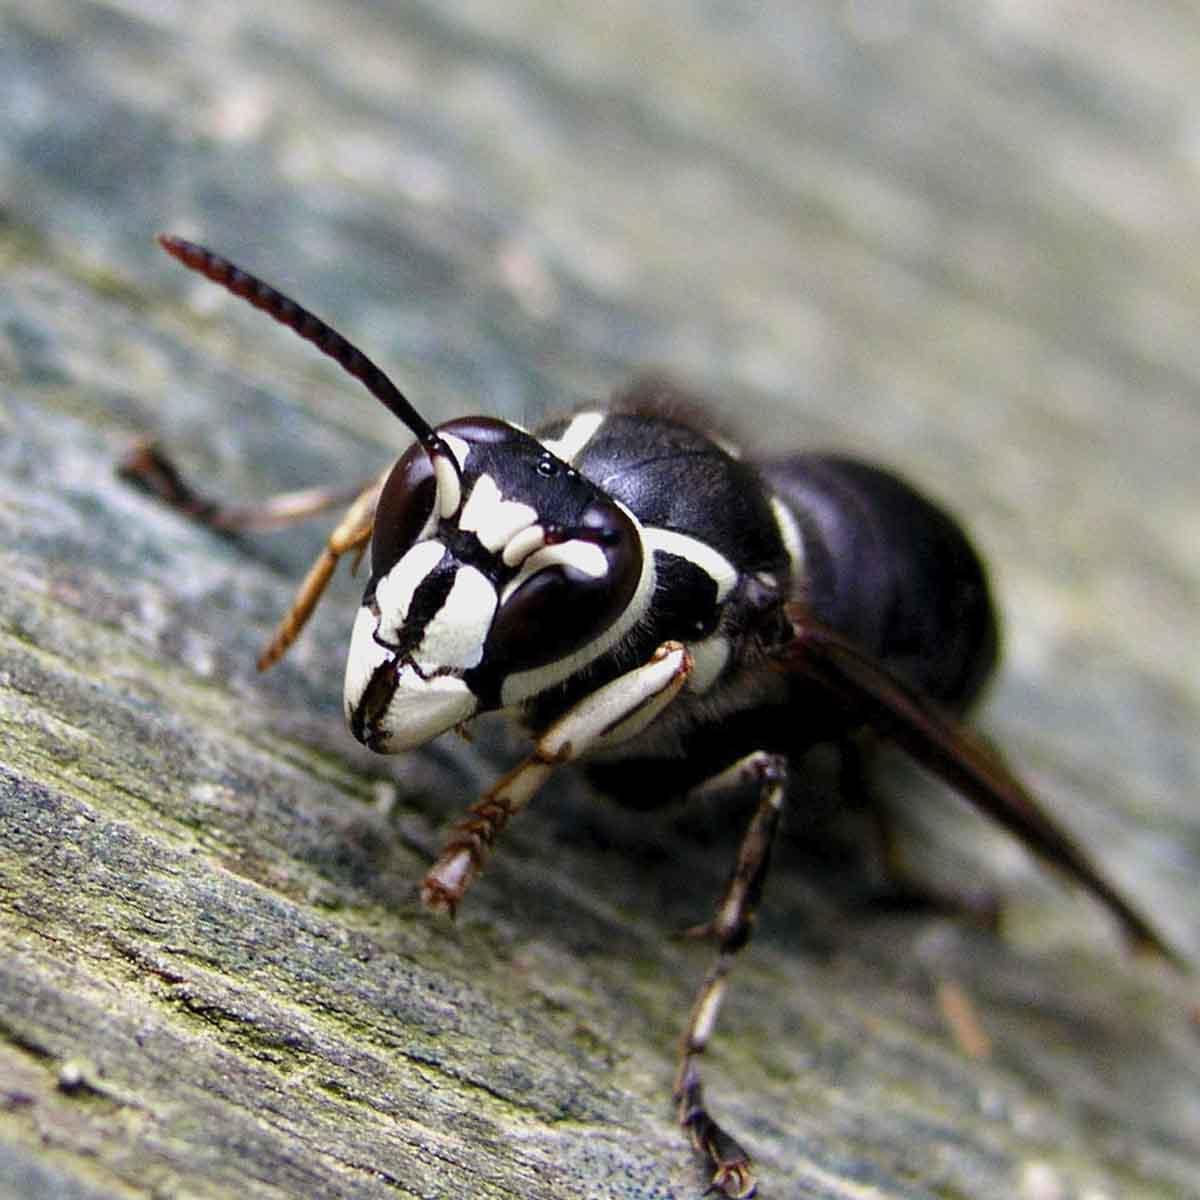 A black and white bald faced hornet